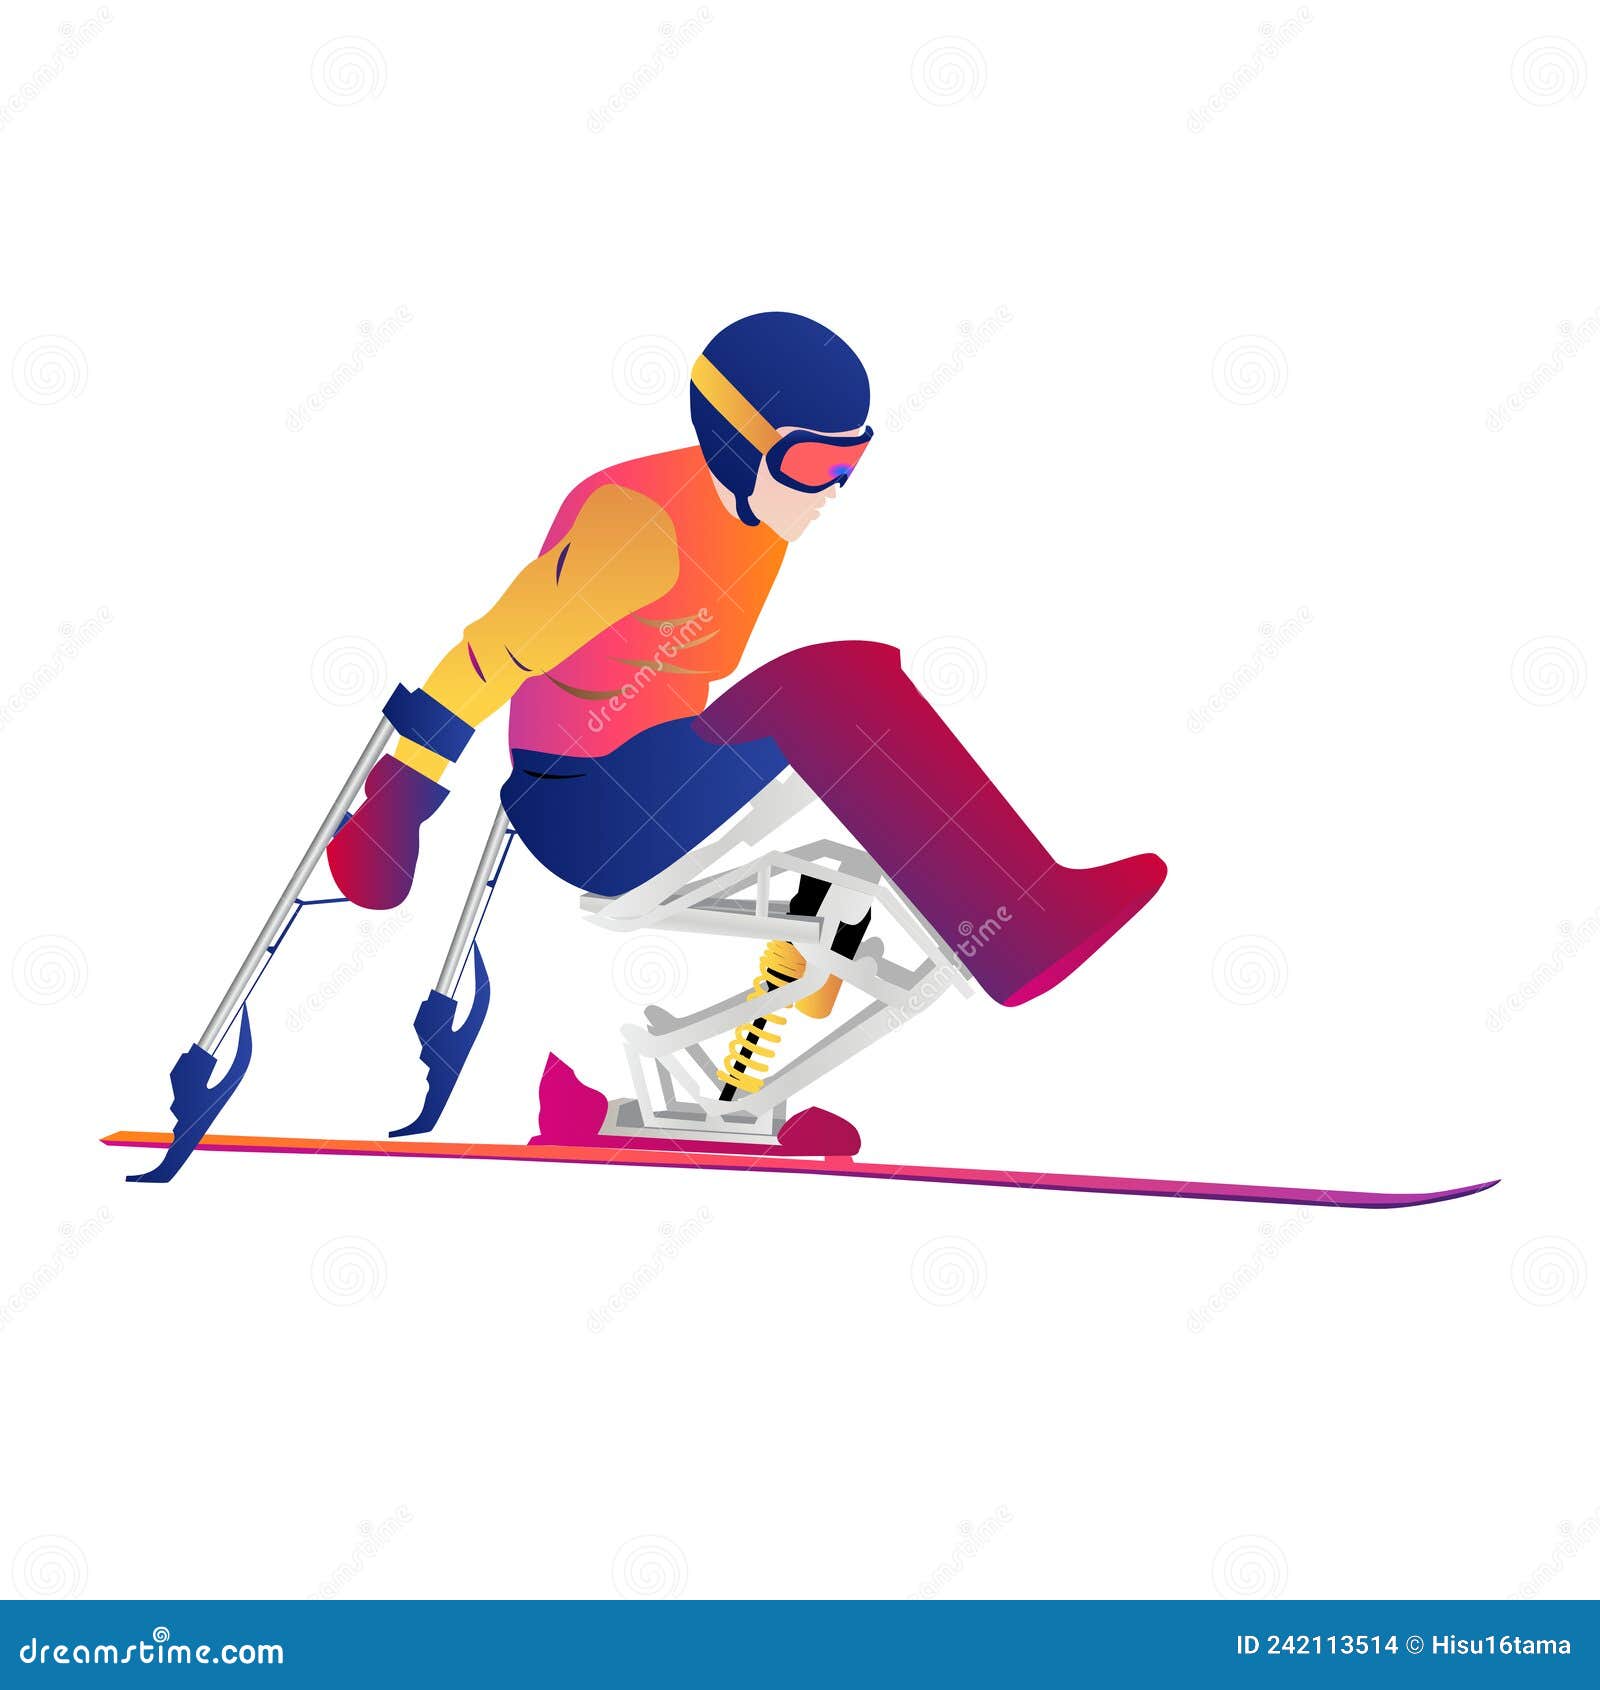 Man Skiing on Mono-ski Isolated on Vector Graphic Illustration Stock Vector - Illustration of competition, sports: 242113514